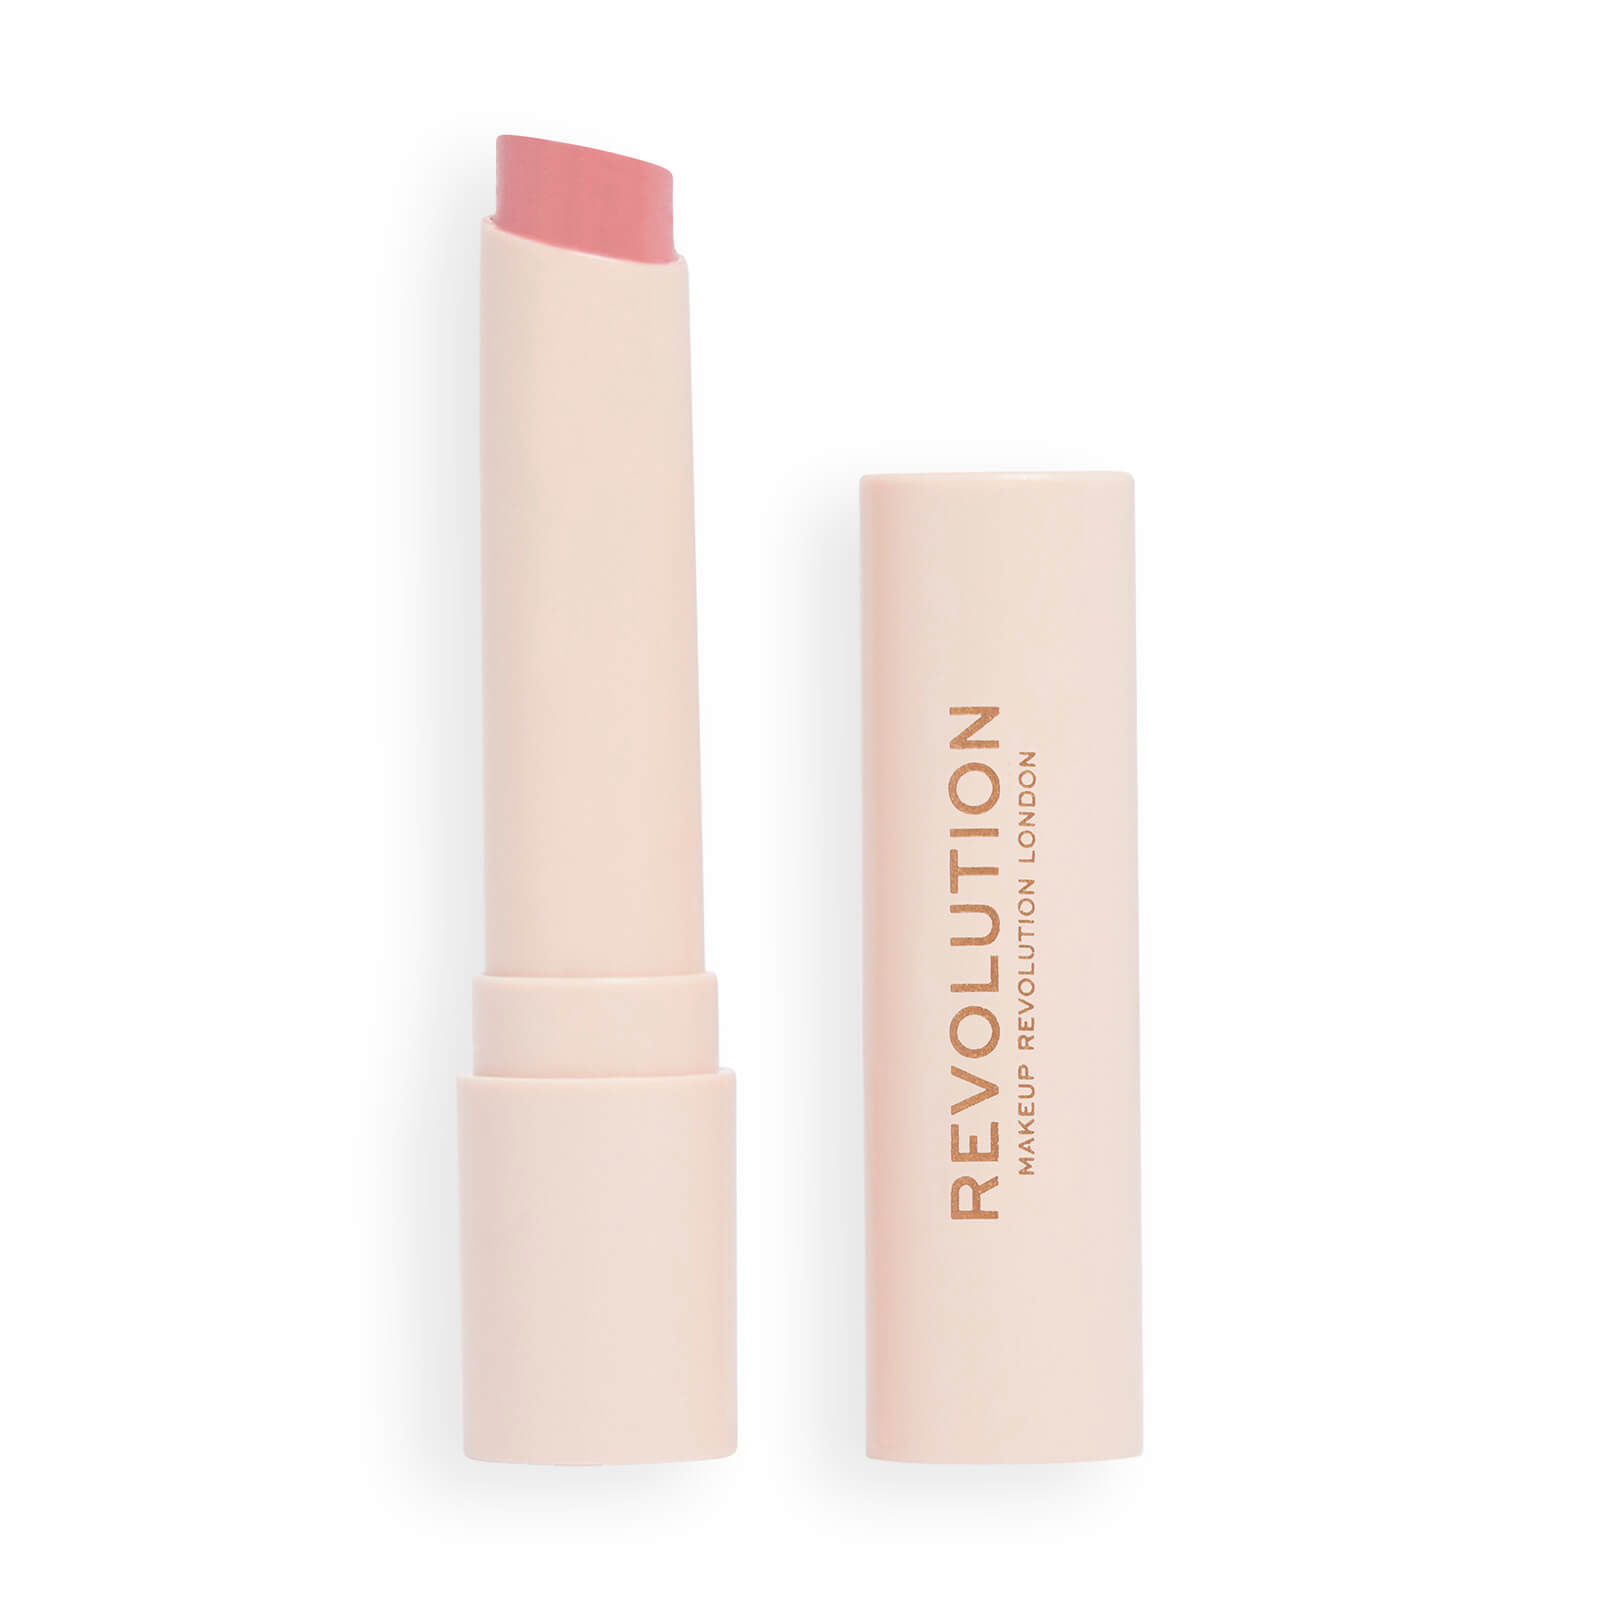 Image of Revolution Beauty Revolution Pout Balm (Various Shades) - Bare Shine